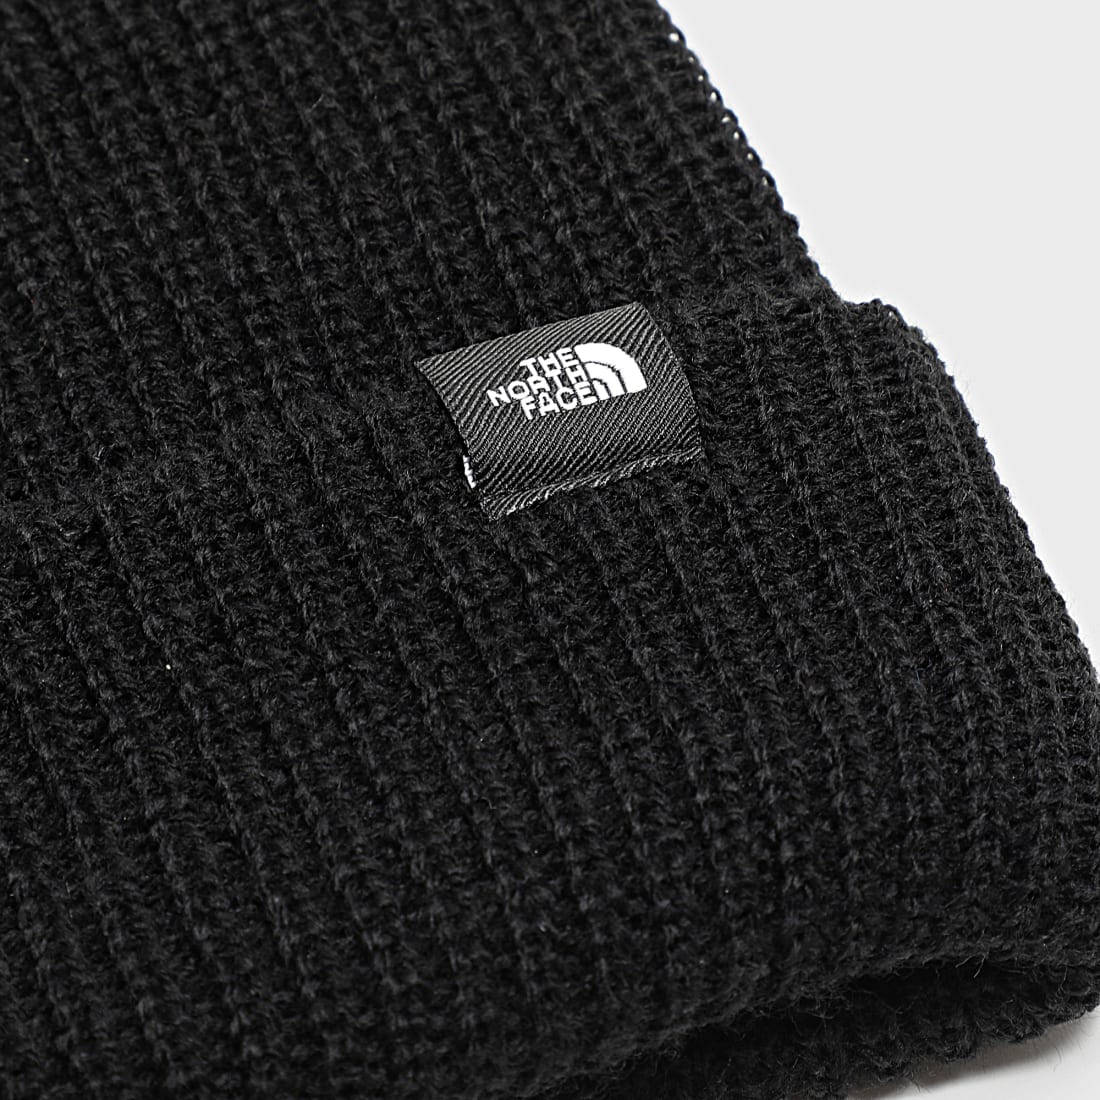 Bonnet The North Face Freebeenie